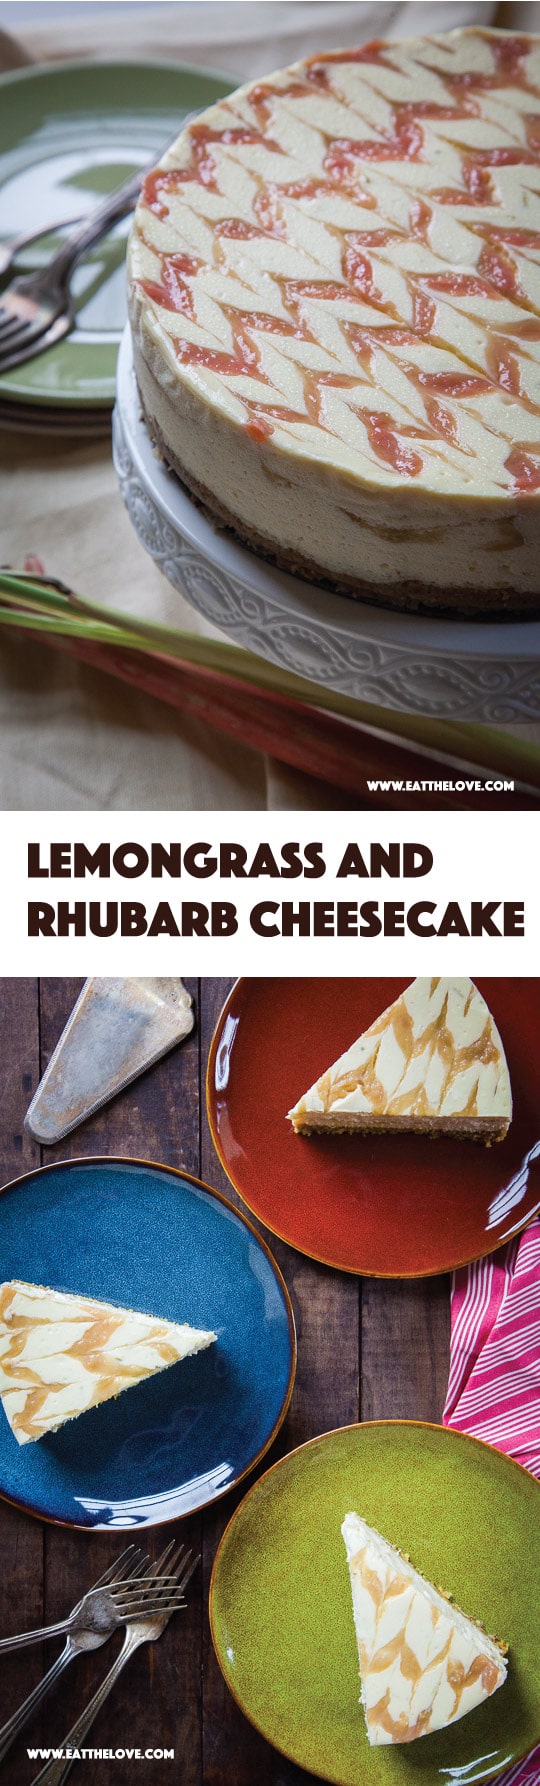 Lemongrass and Rhubarb Cheesecake! Recipe by Irvin Lin of Eat the Love.